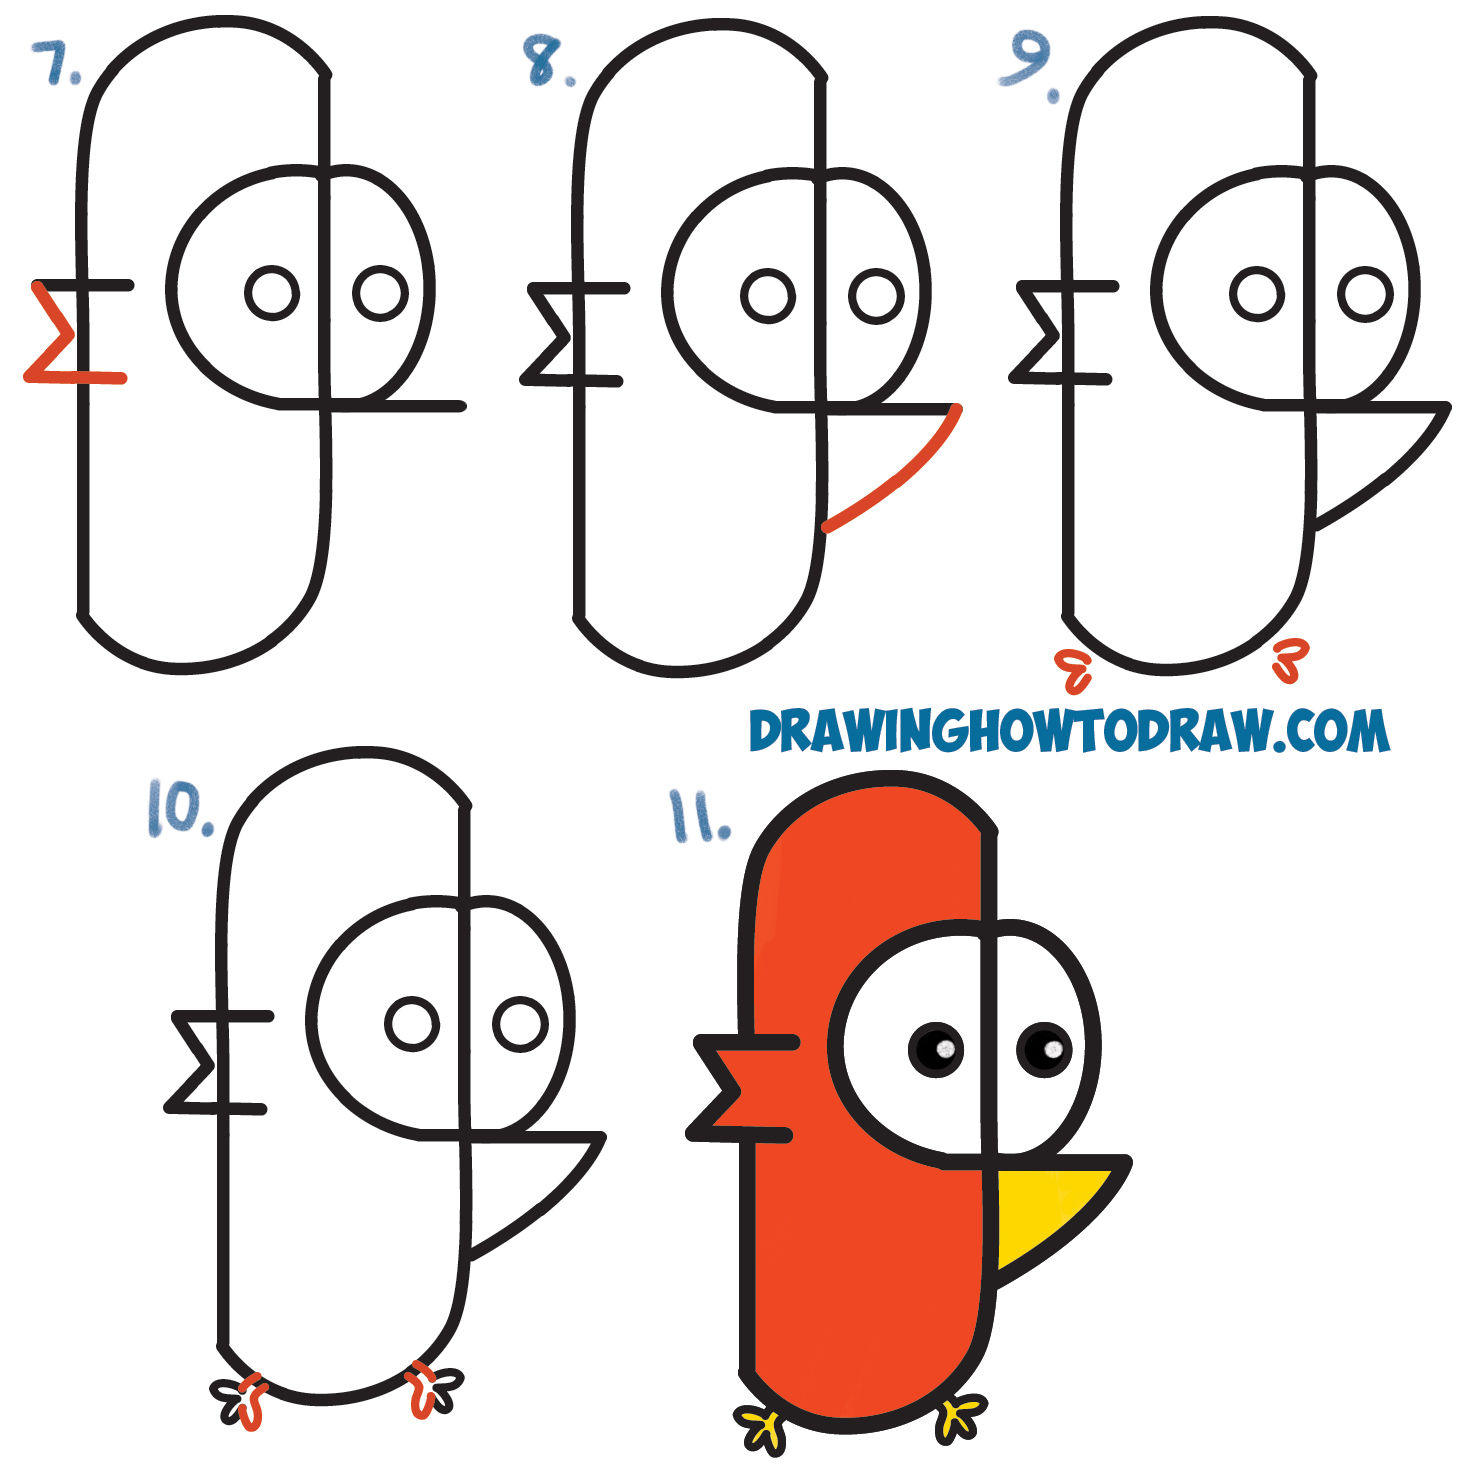 Learn How to Draw Cute Cartoon Bird from Lowercase Letter 'f' Shapes Simple Shapes Drawing Lesson for Beginners and Children